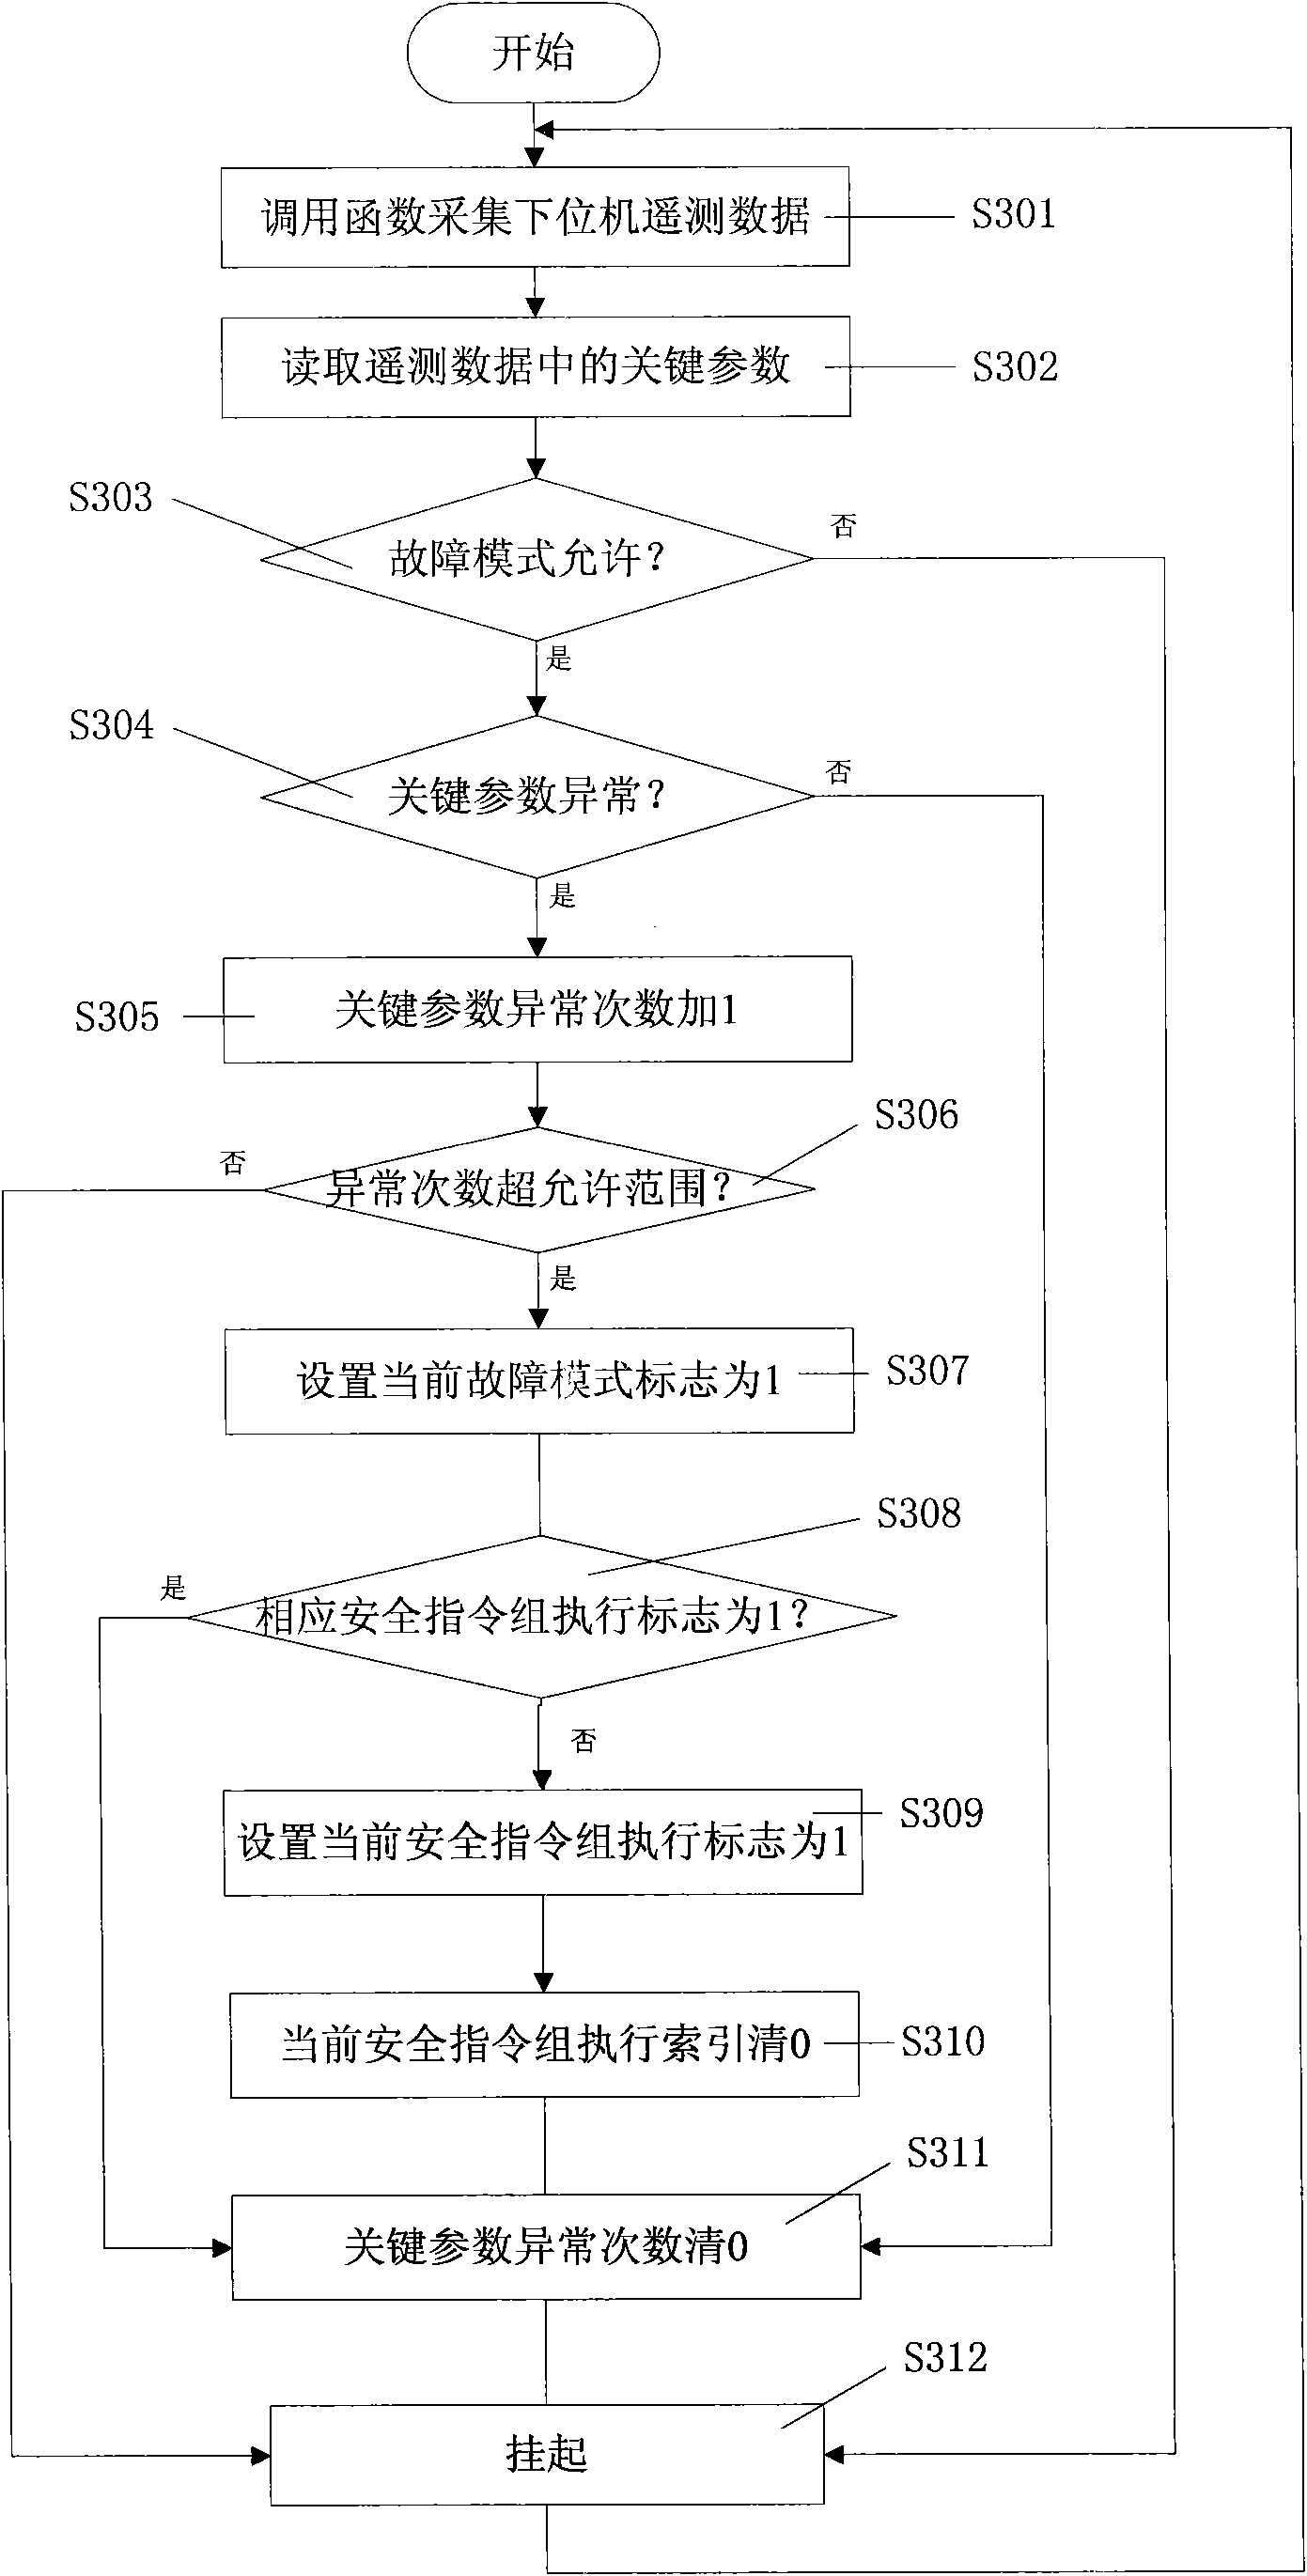 Fault recognition and processing method based on satellite-bone bus